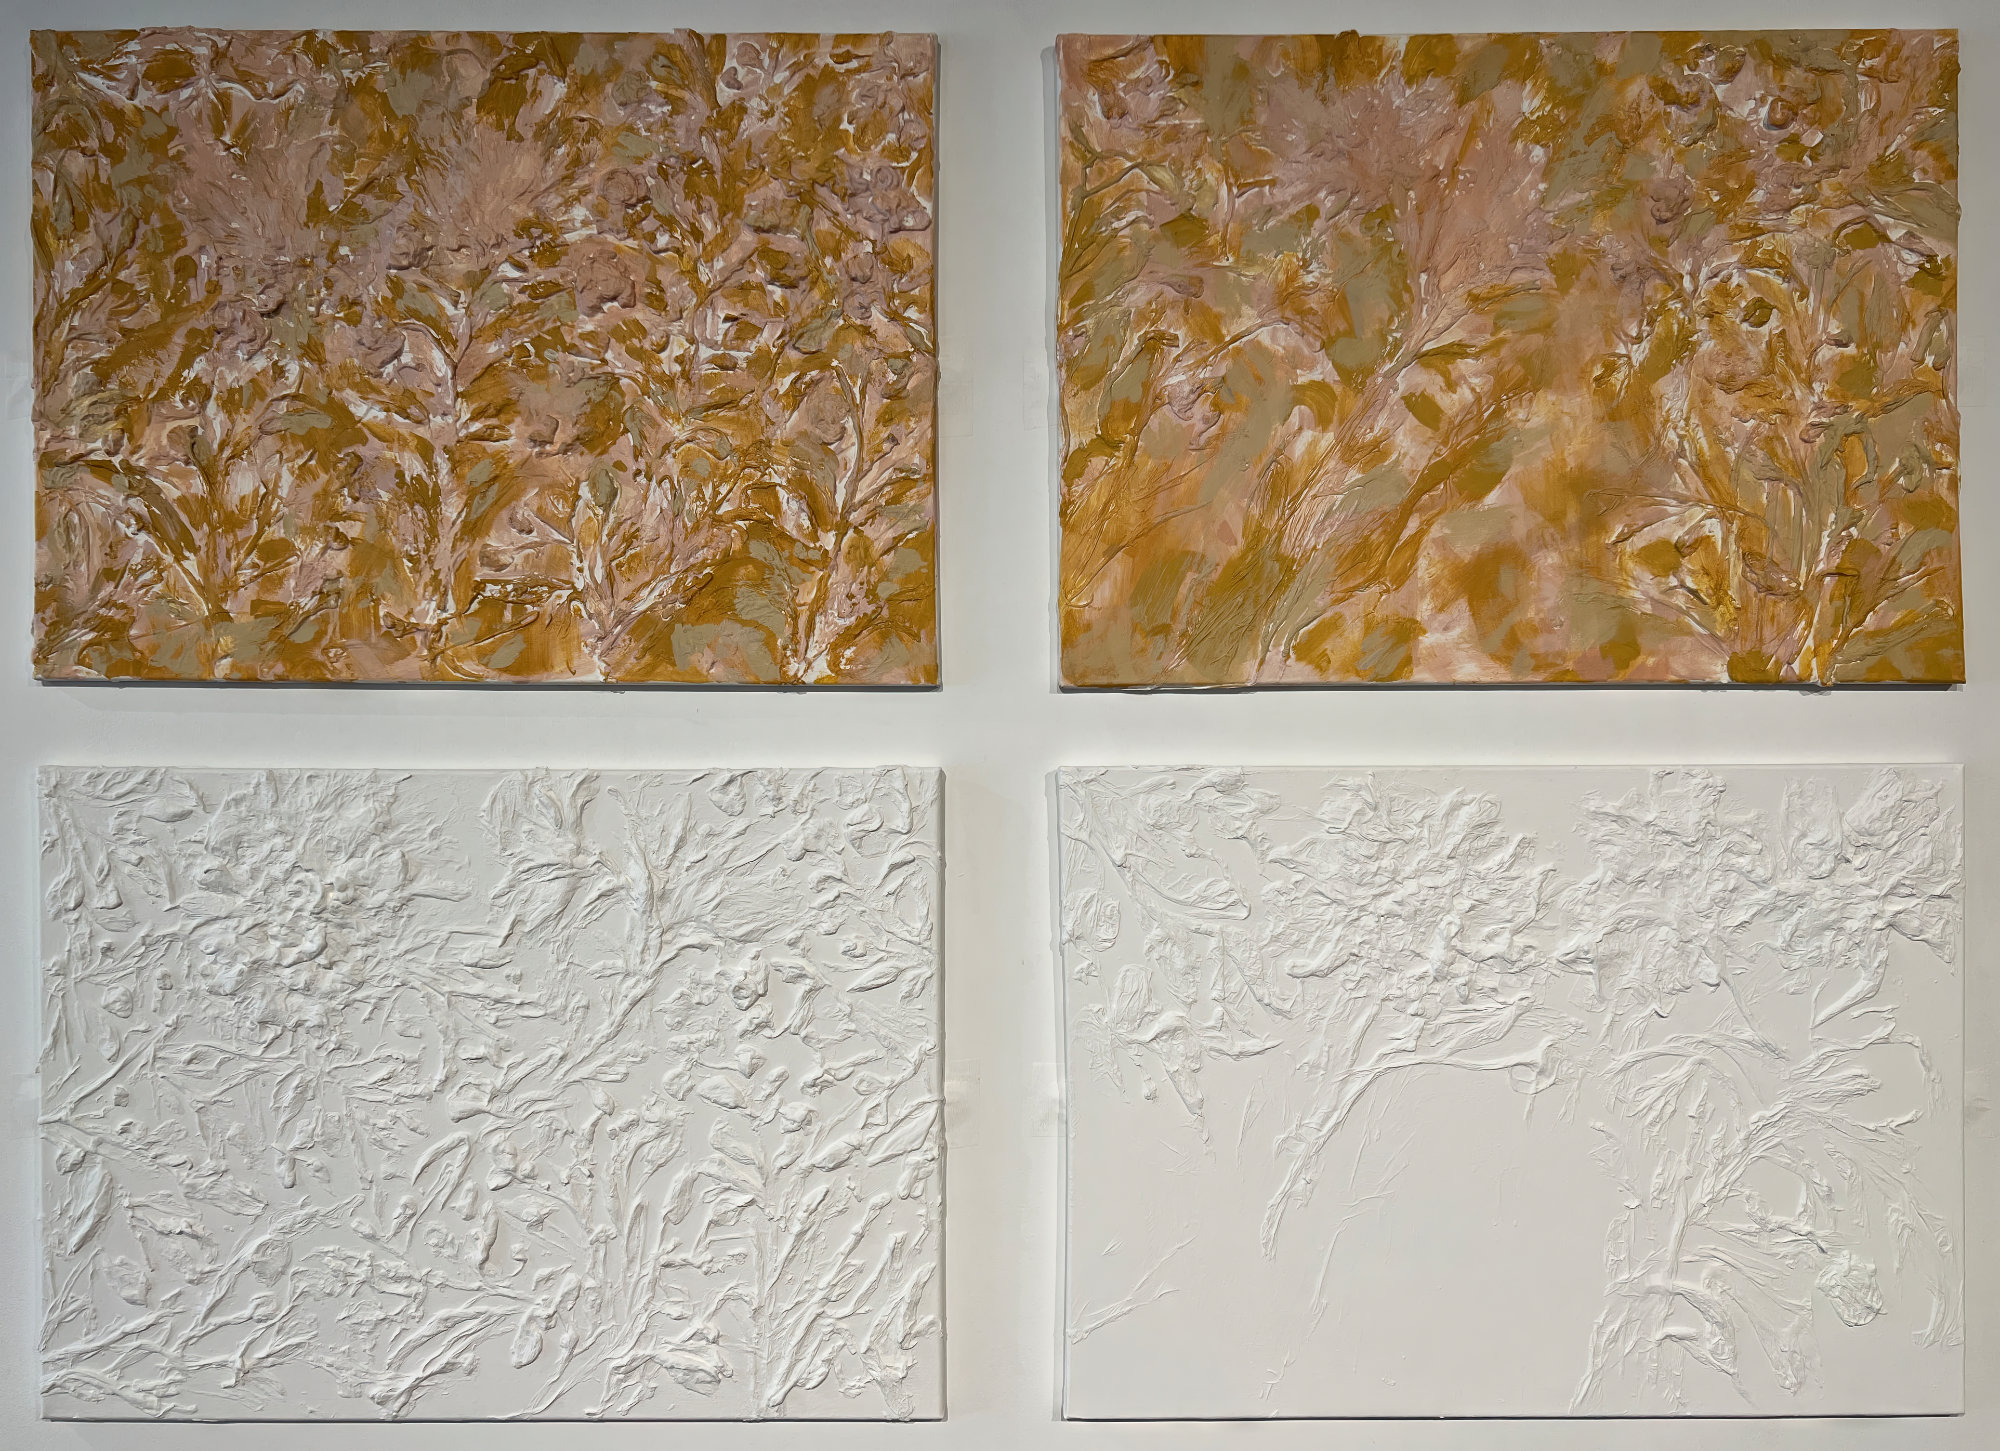 This image comprises of four canvas images; two white, two yellow in colour. Each canvas has textures built up through soft sponged marks and relief tissue paper,depicting roses and leaves. The coloured paintings are washed in a warm glow of pale pinks, yellows and touches of green.